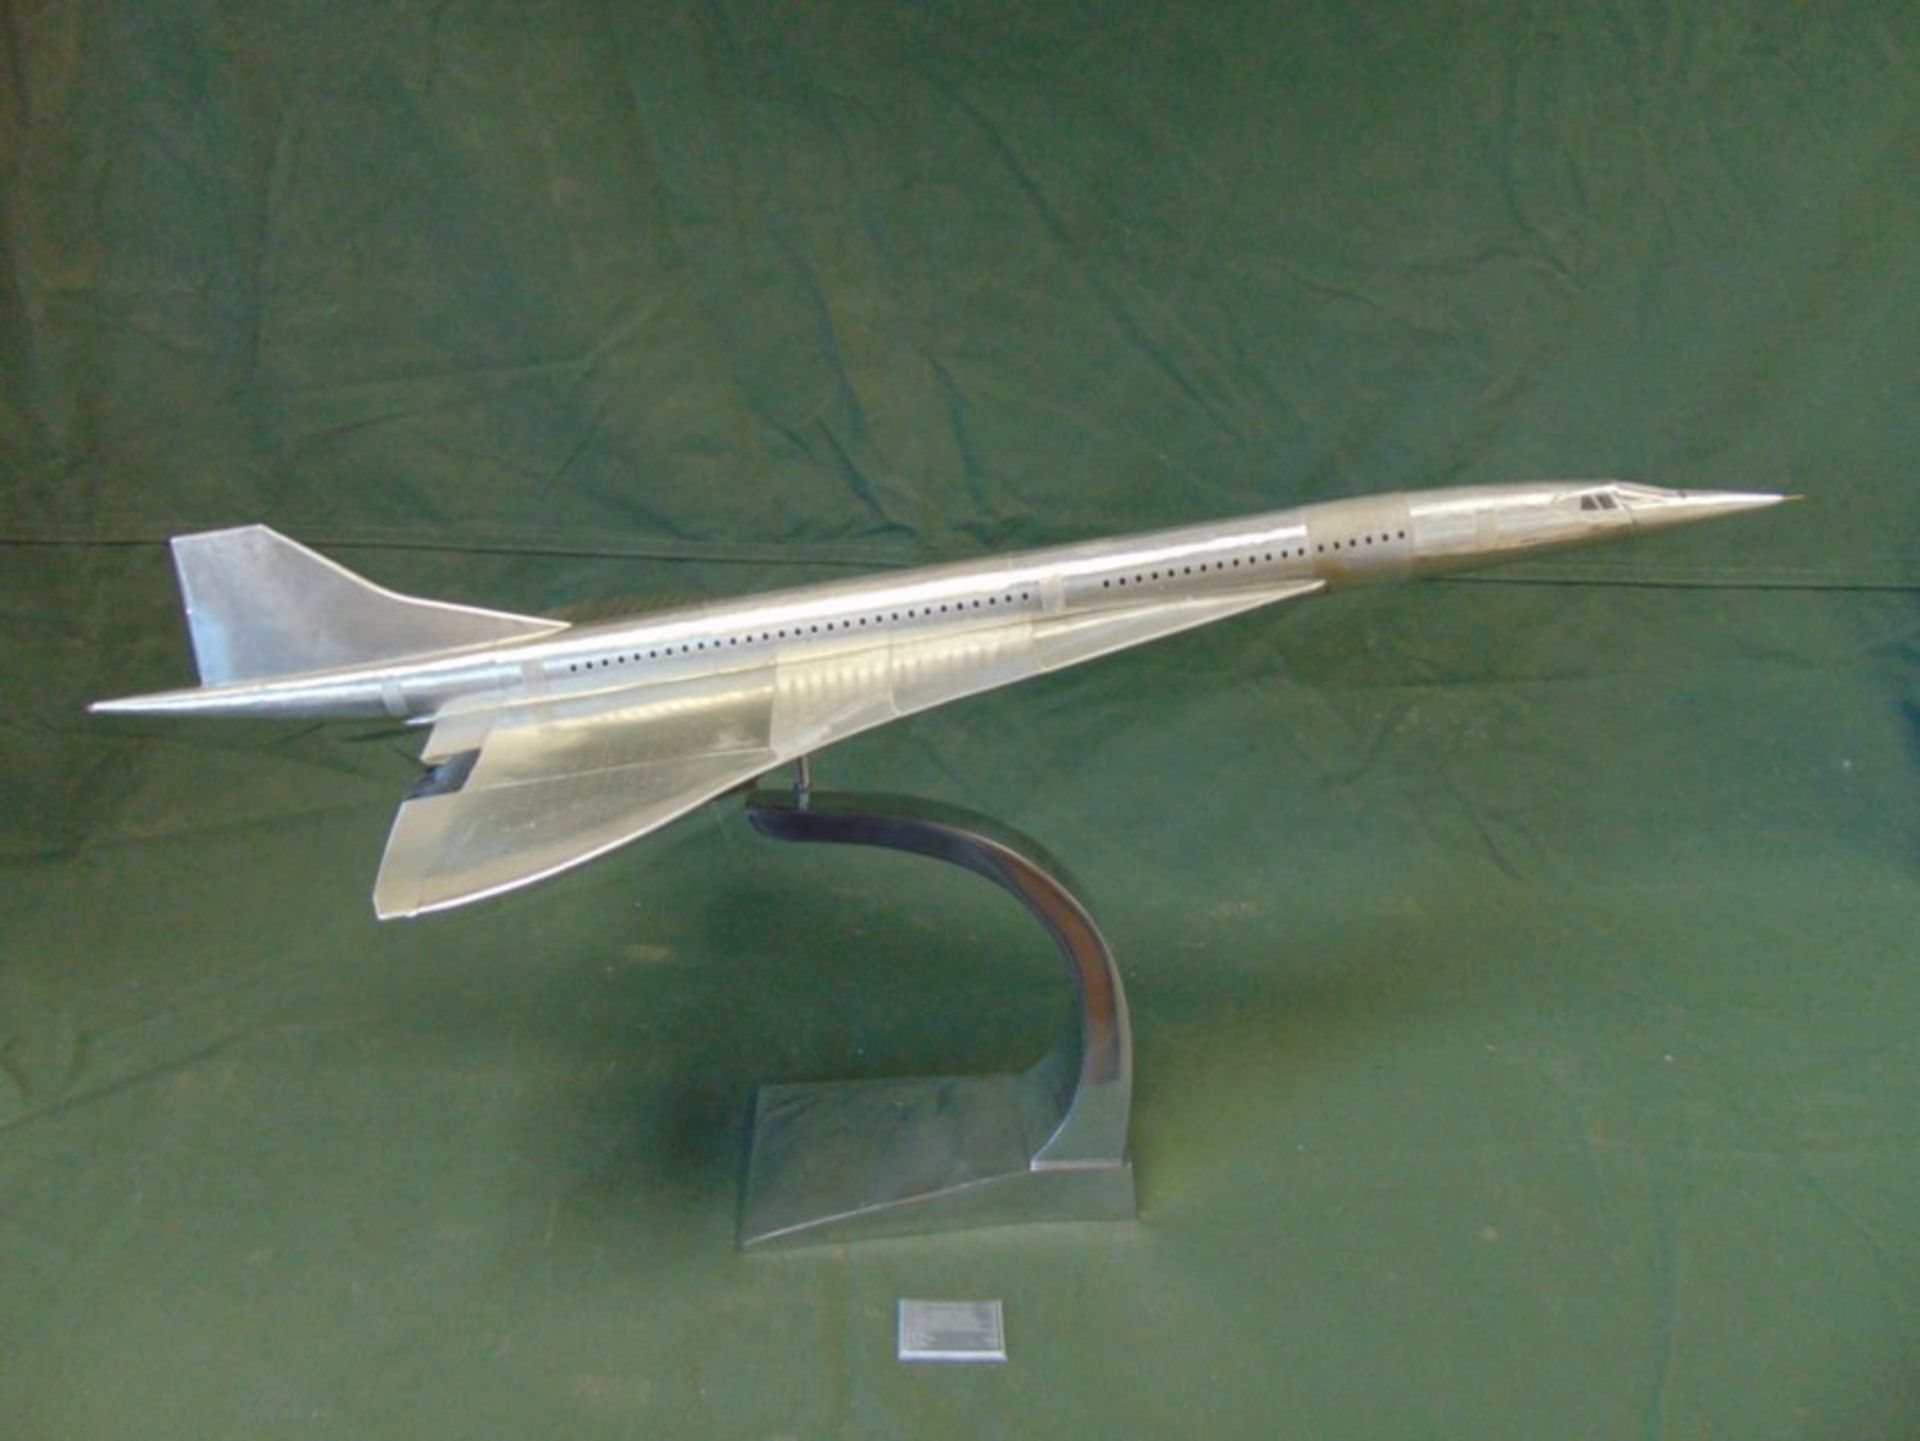 NEW JUST LANDED Large Aluminium Concorde Model - Image 2 of 14